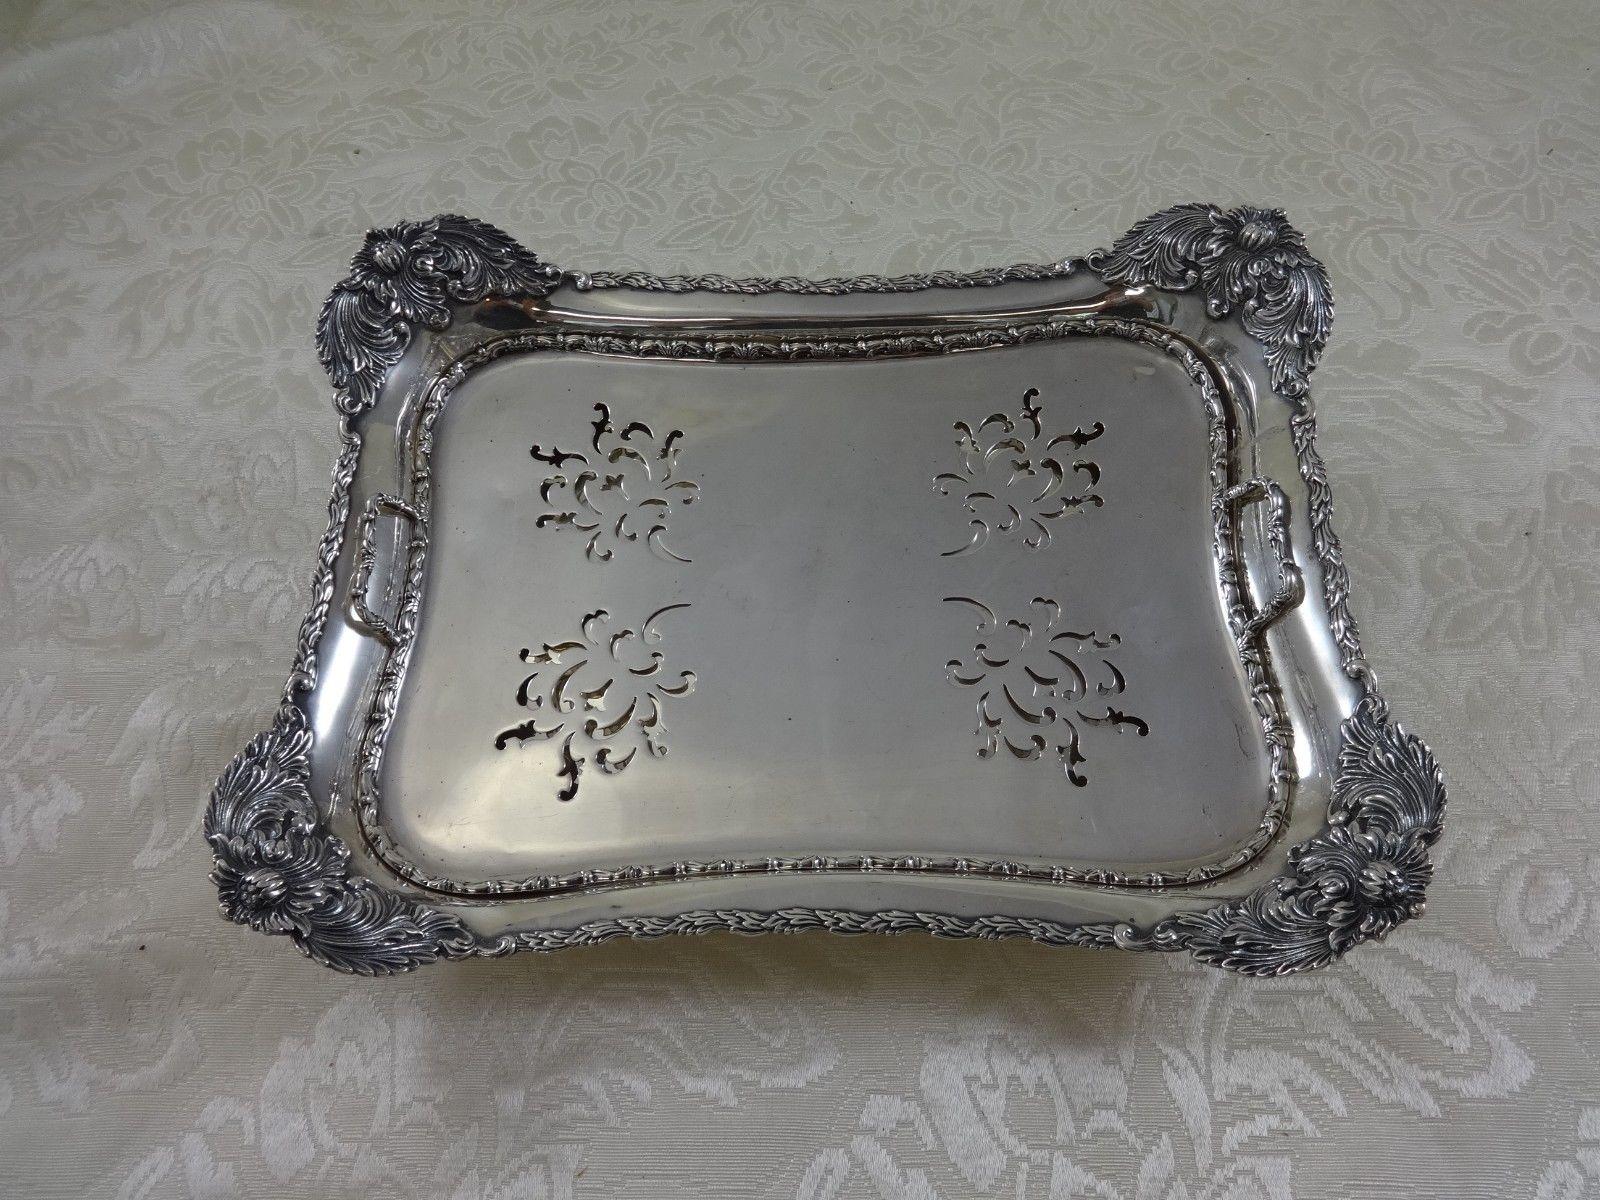 Superb Chrysanthemum by Tiffany & Co. sterling asparagus tray with pierced chrysanthemum scroll-work insert. The corners and feet feature large chrysanthemums. The piece is stamped with a C date mark for 1902-7 and #13372/1915. The measurements for